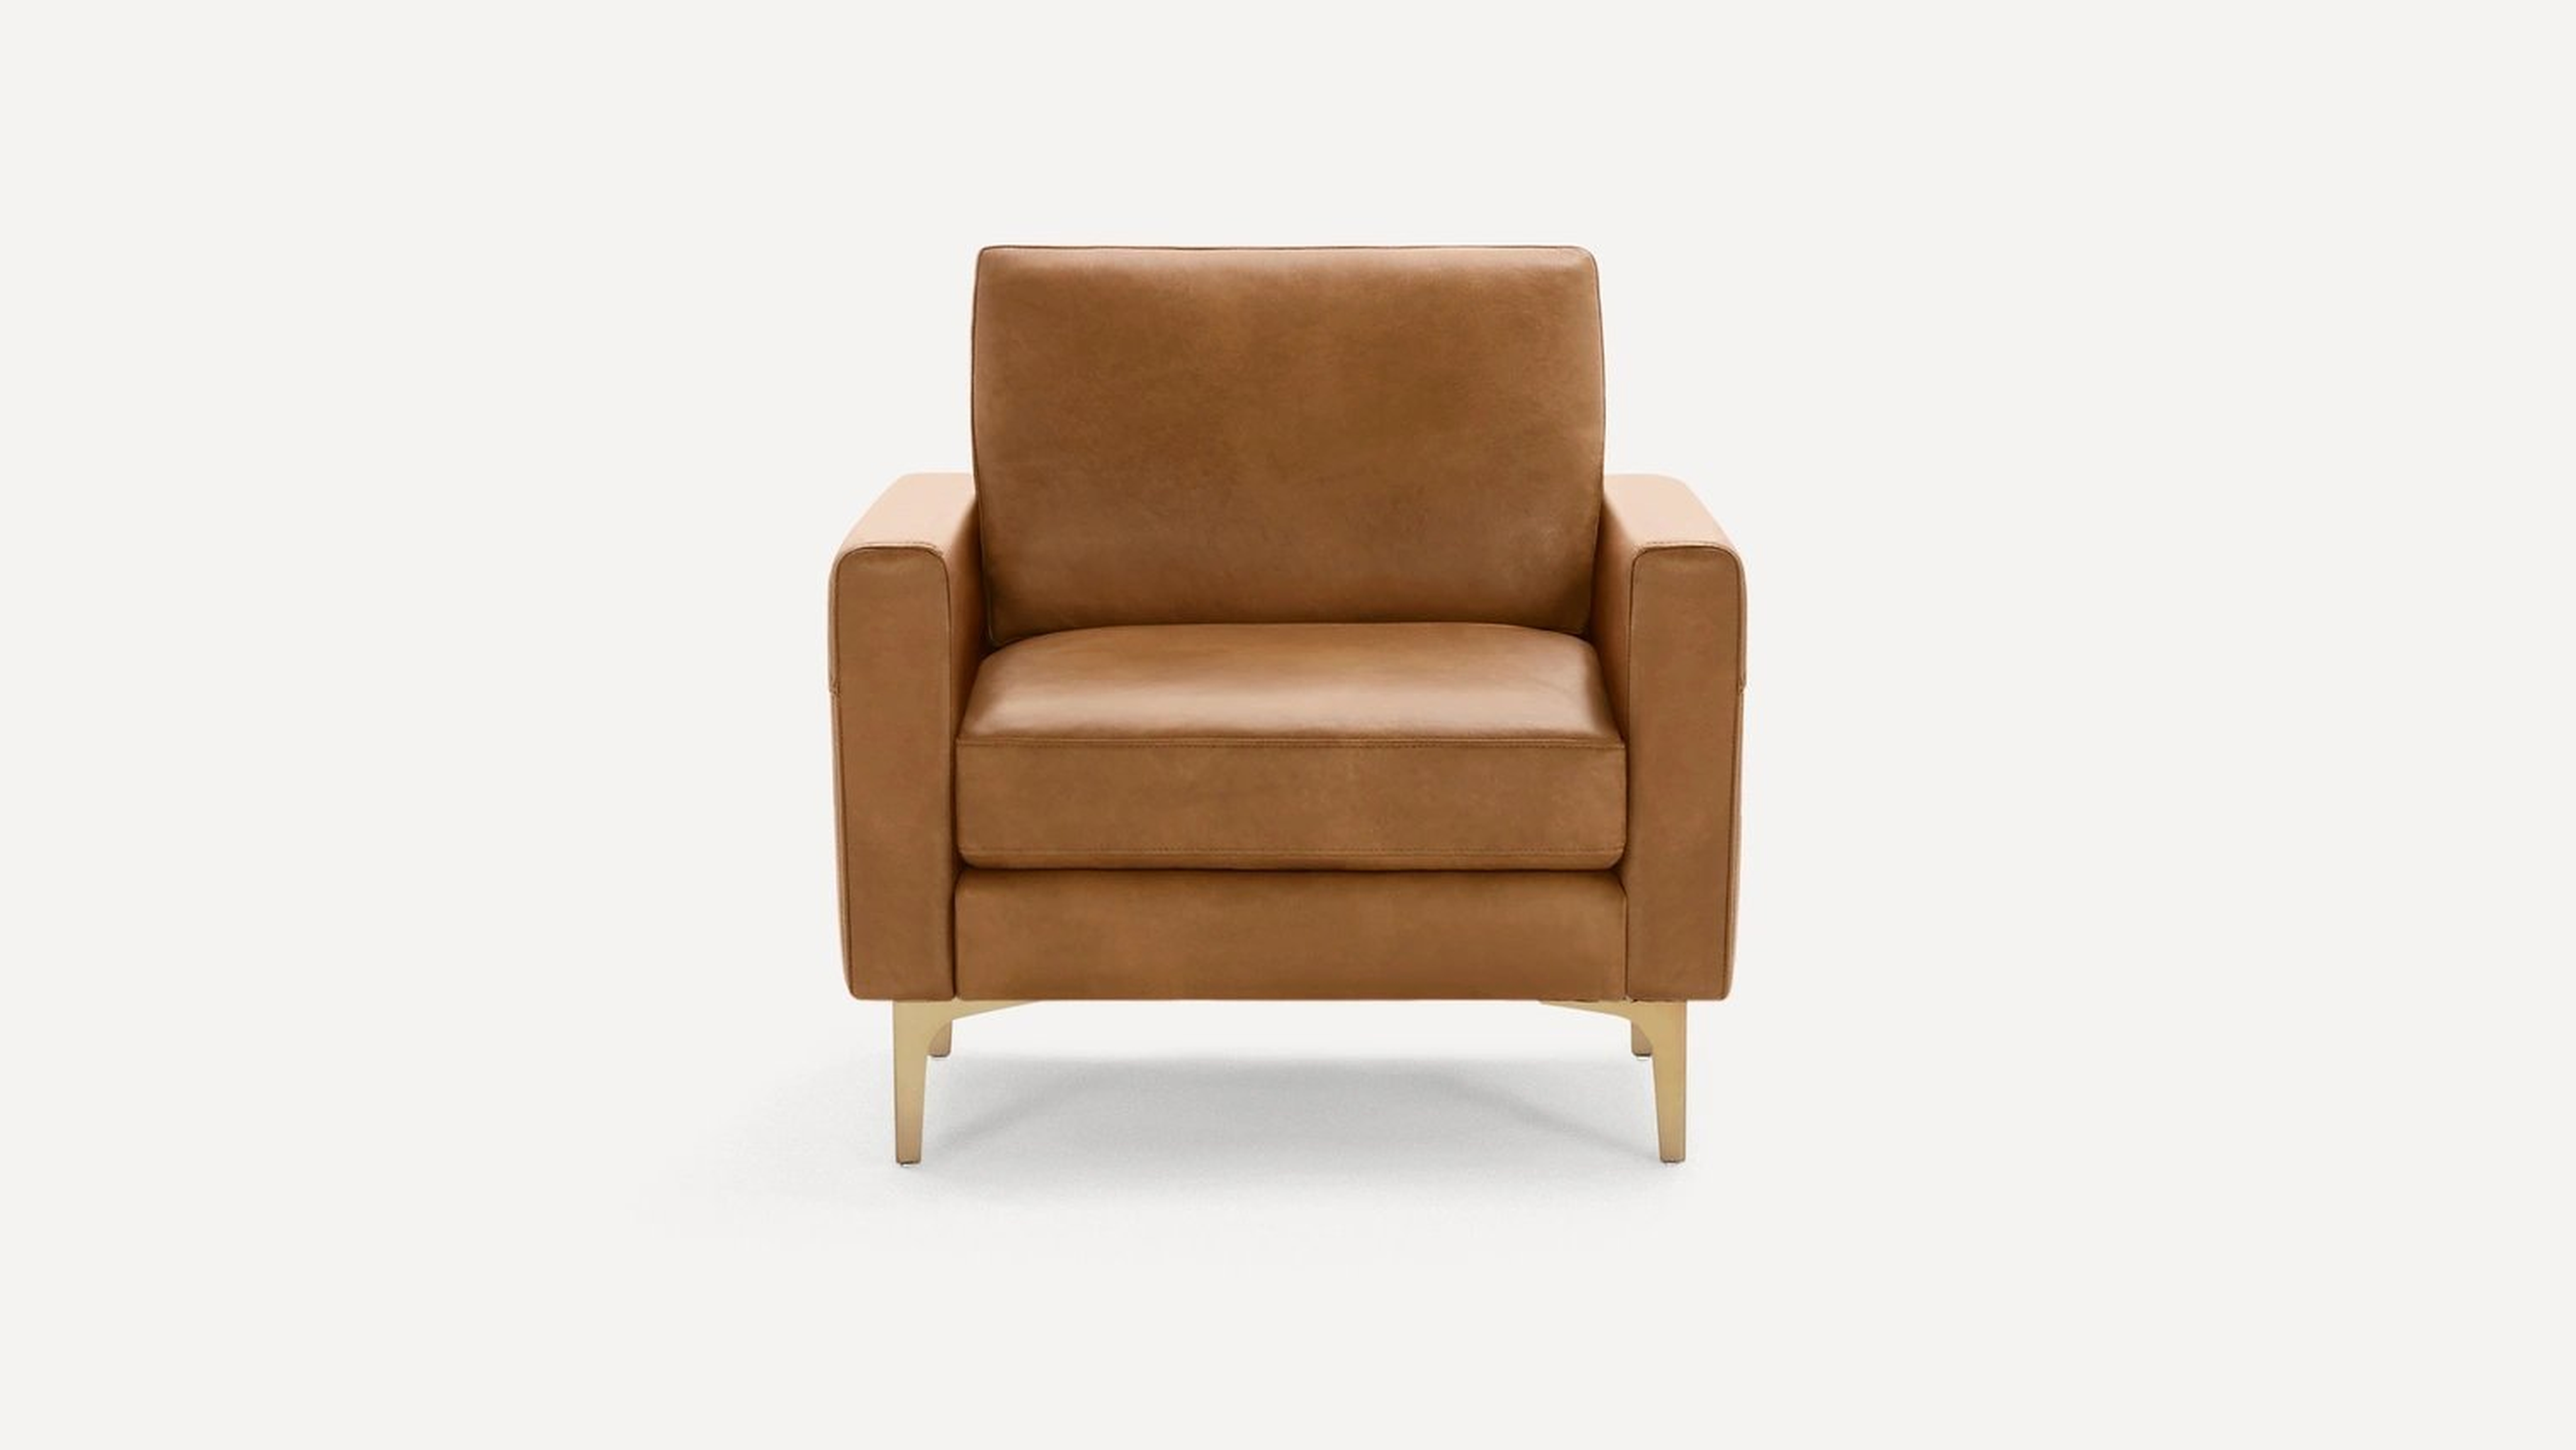 Nomad Leather Club Chair in Camel, Brass Legs - Burrow